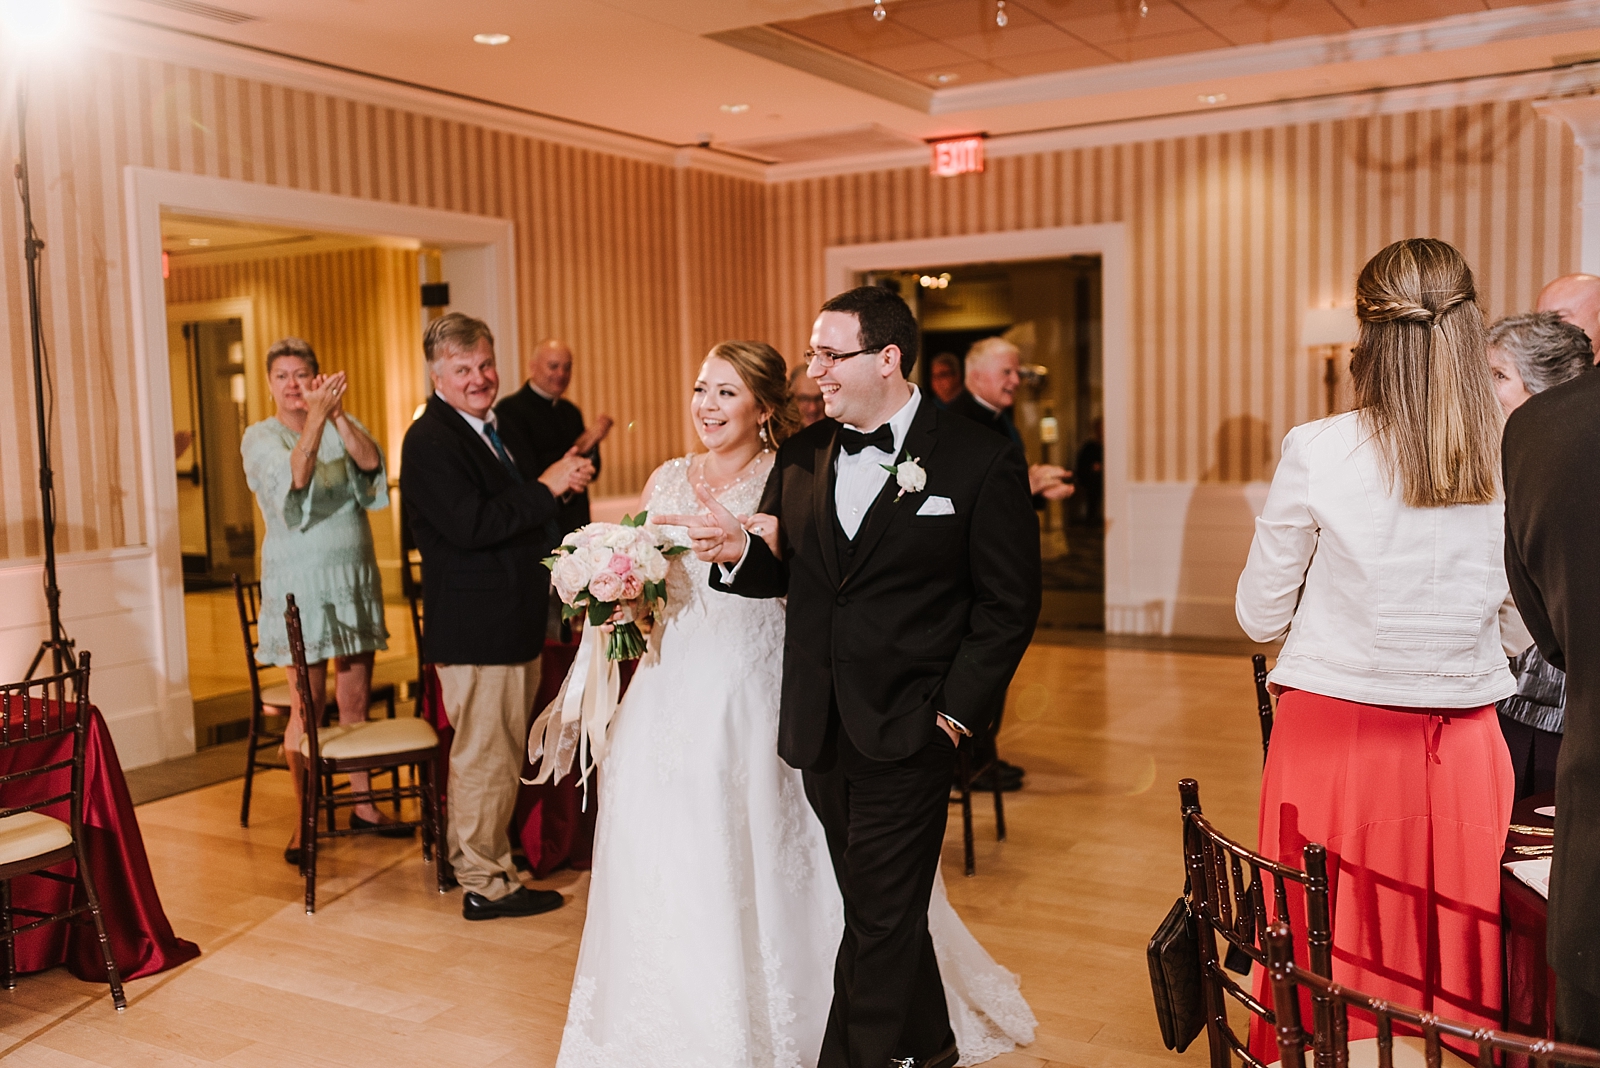 Summer Wedding at Beauport Hotel in Gloucester, MA by Boston Wedding Photographer Annmarie Swift